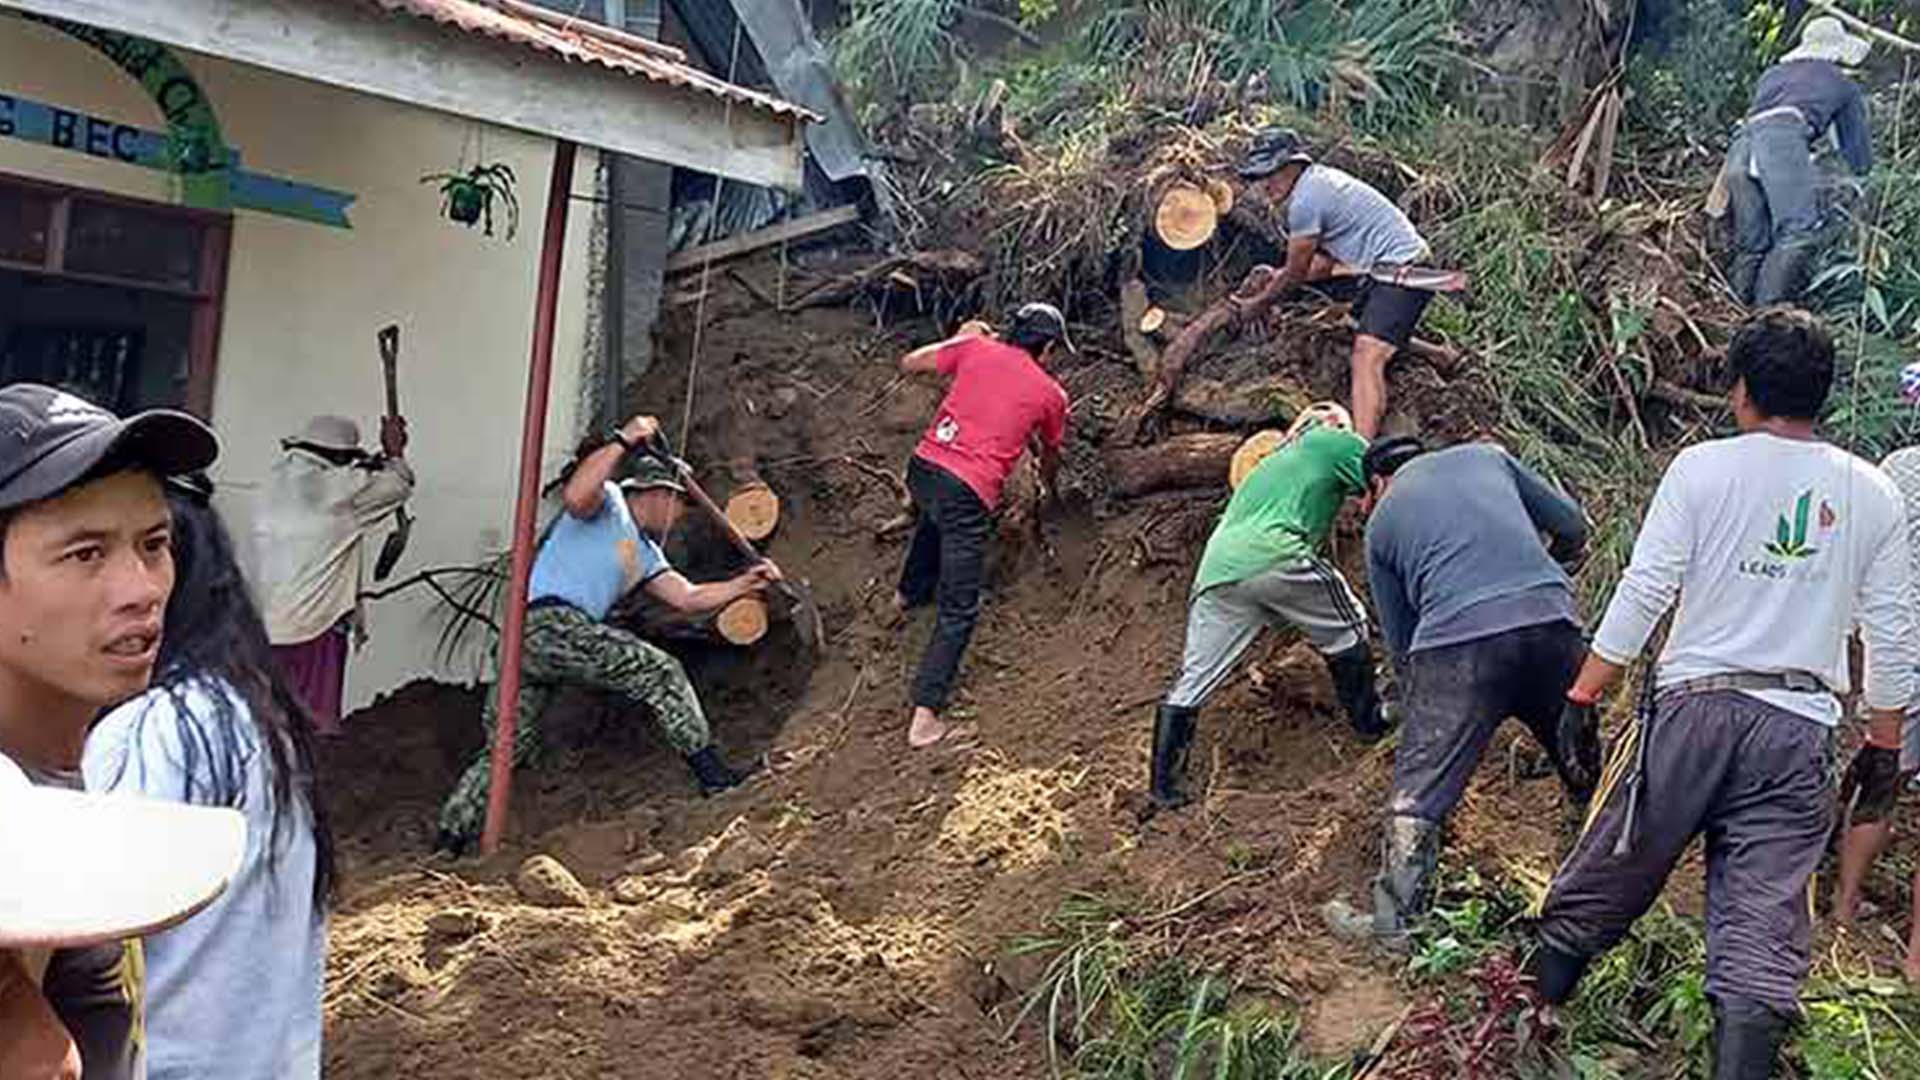  Villagers and rescue workers digging following a landslide caused by a 7.0-magnitude quake in Philippines. AFP